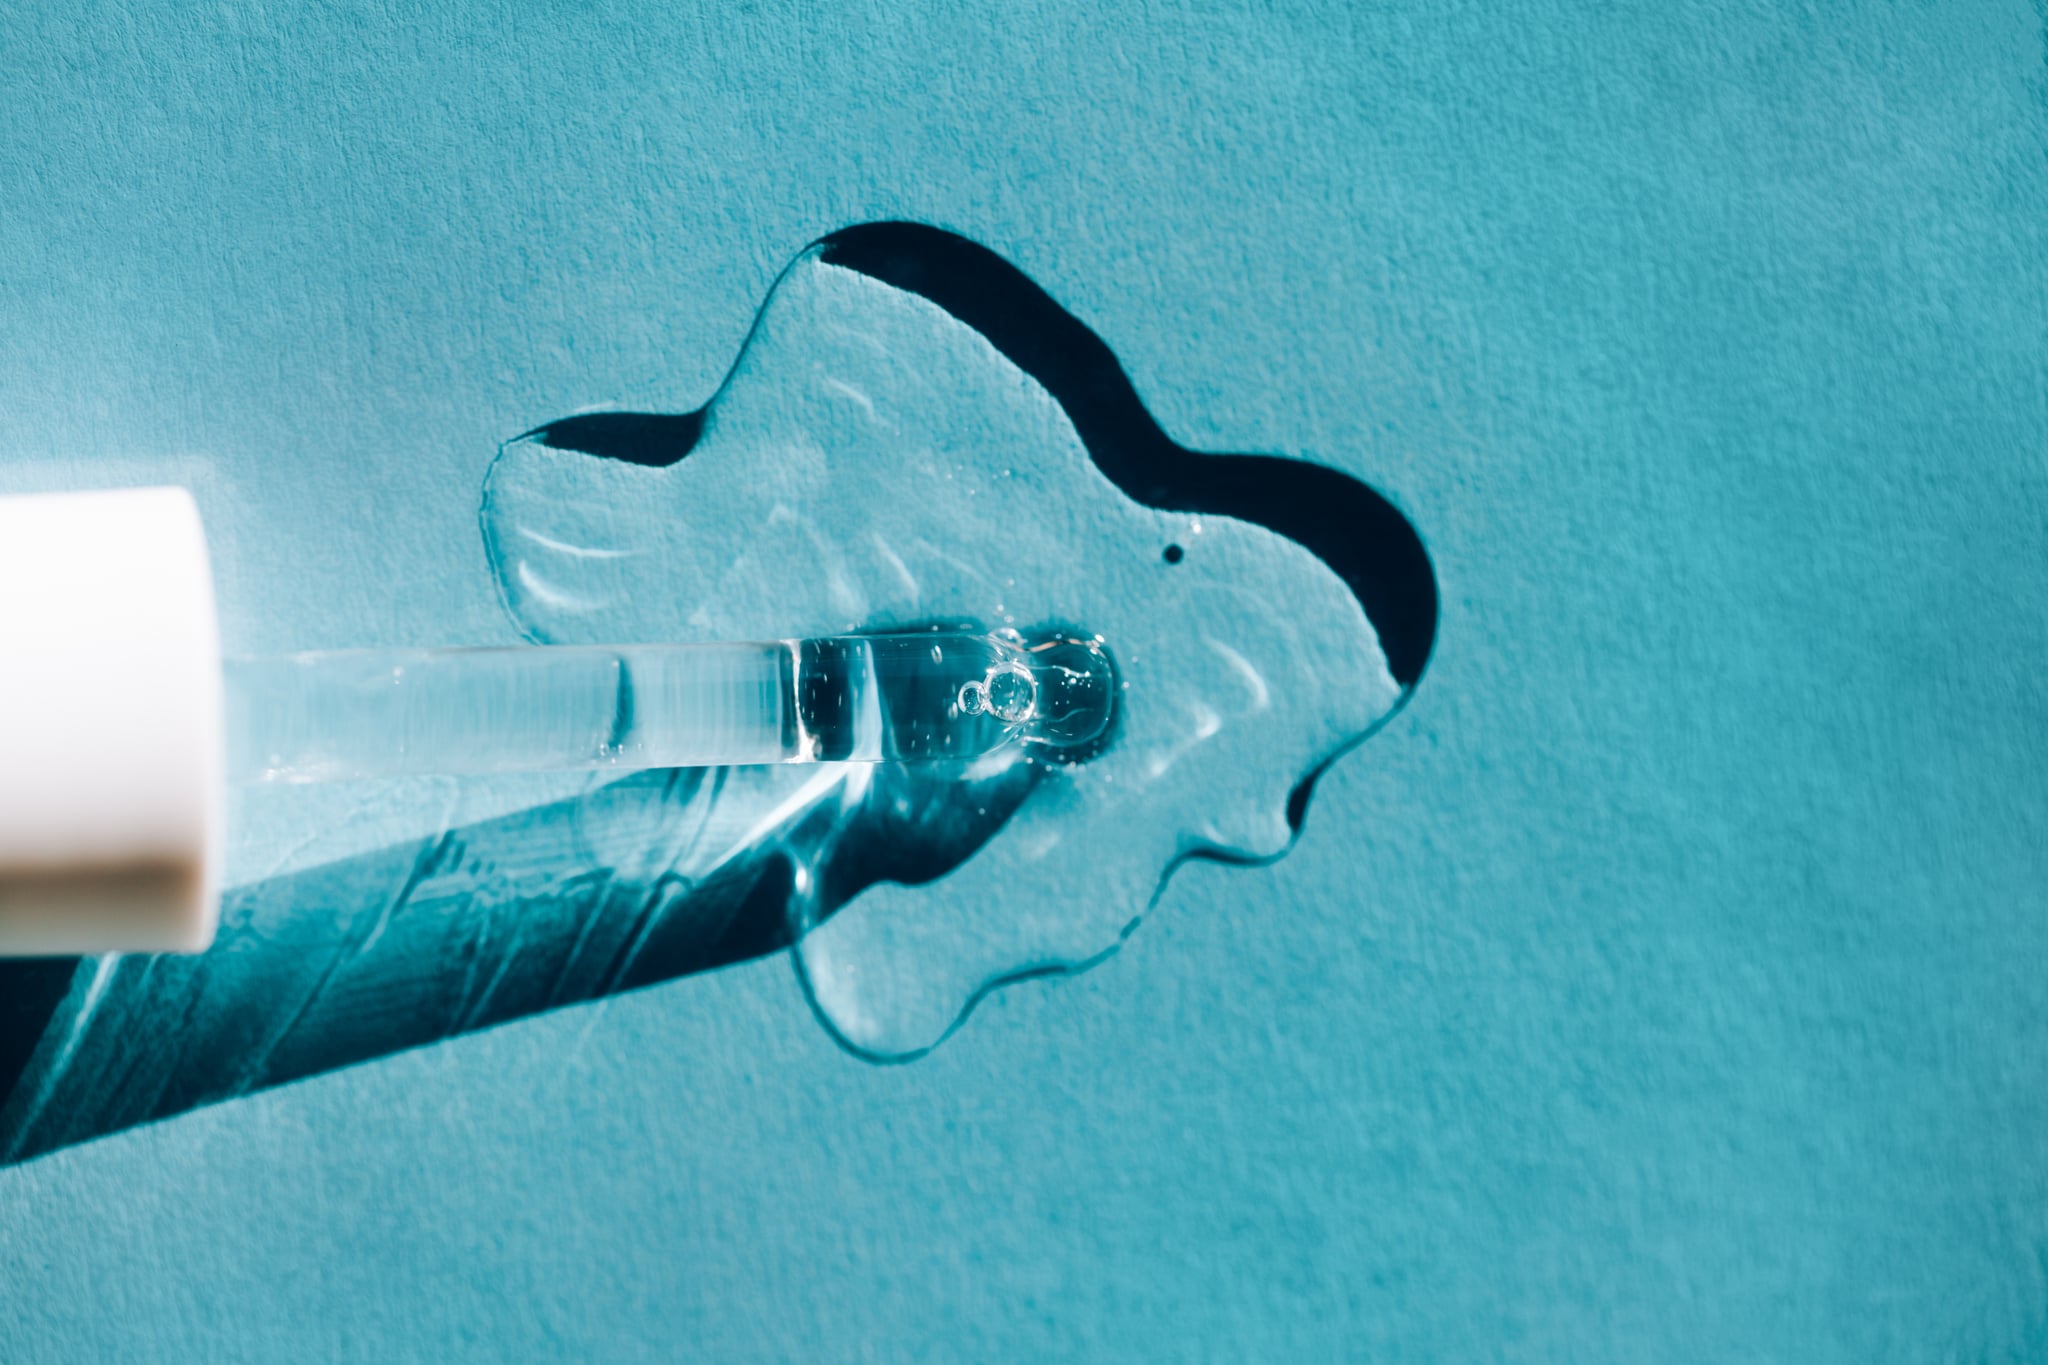 Putting a glass pipette close-up in a pool of transparent solution for a spa procedure on a blue background